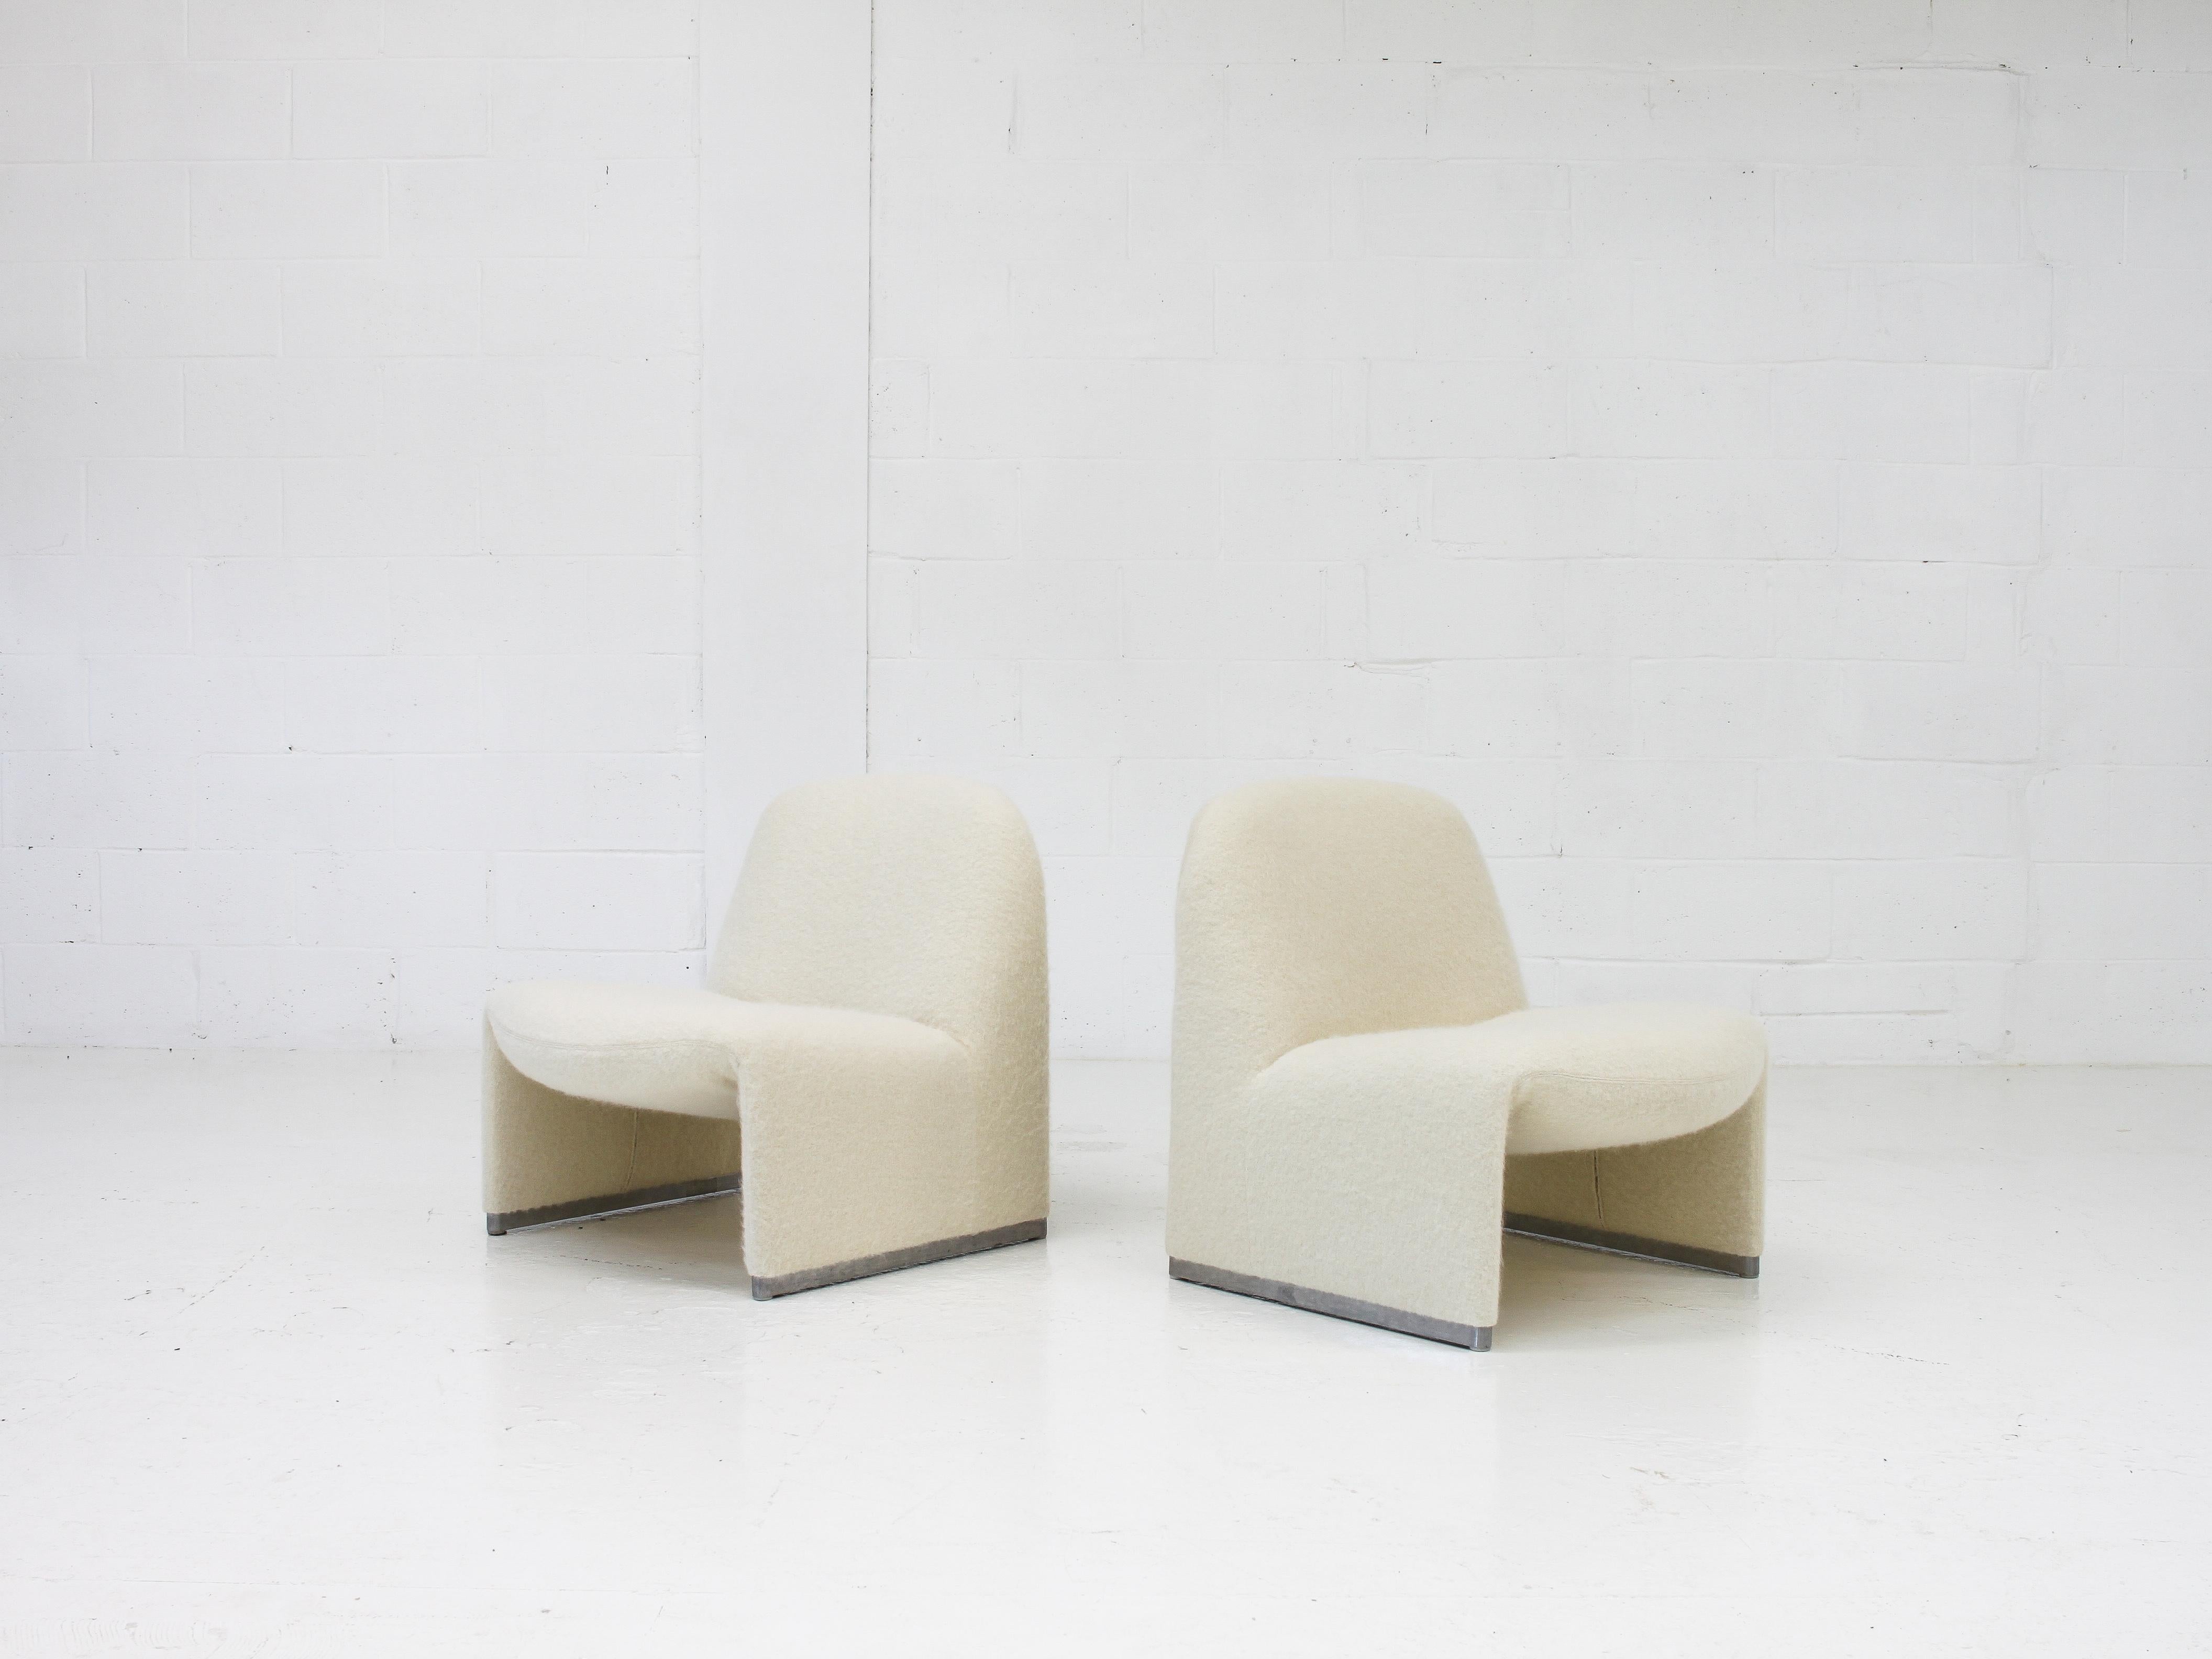 Pair of Giancarlo Piretti “Alky” Chairs in Fluffy Pierre Frey, Artifort, 1970s 6